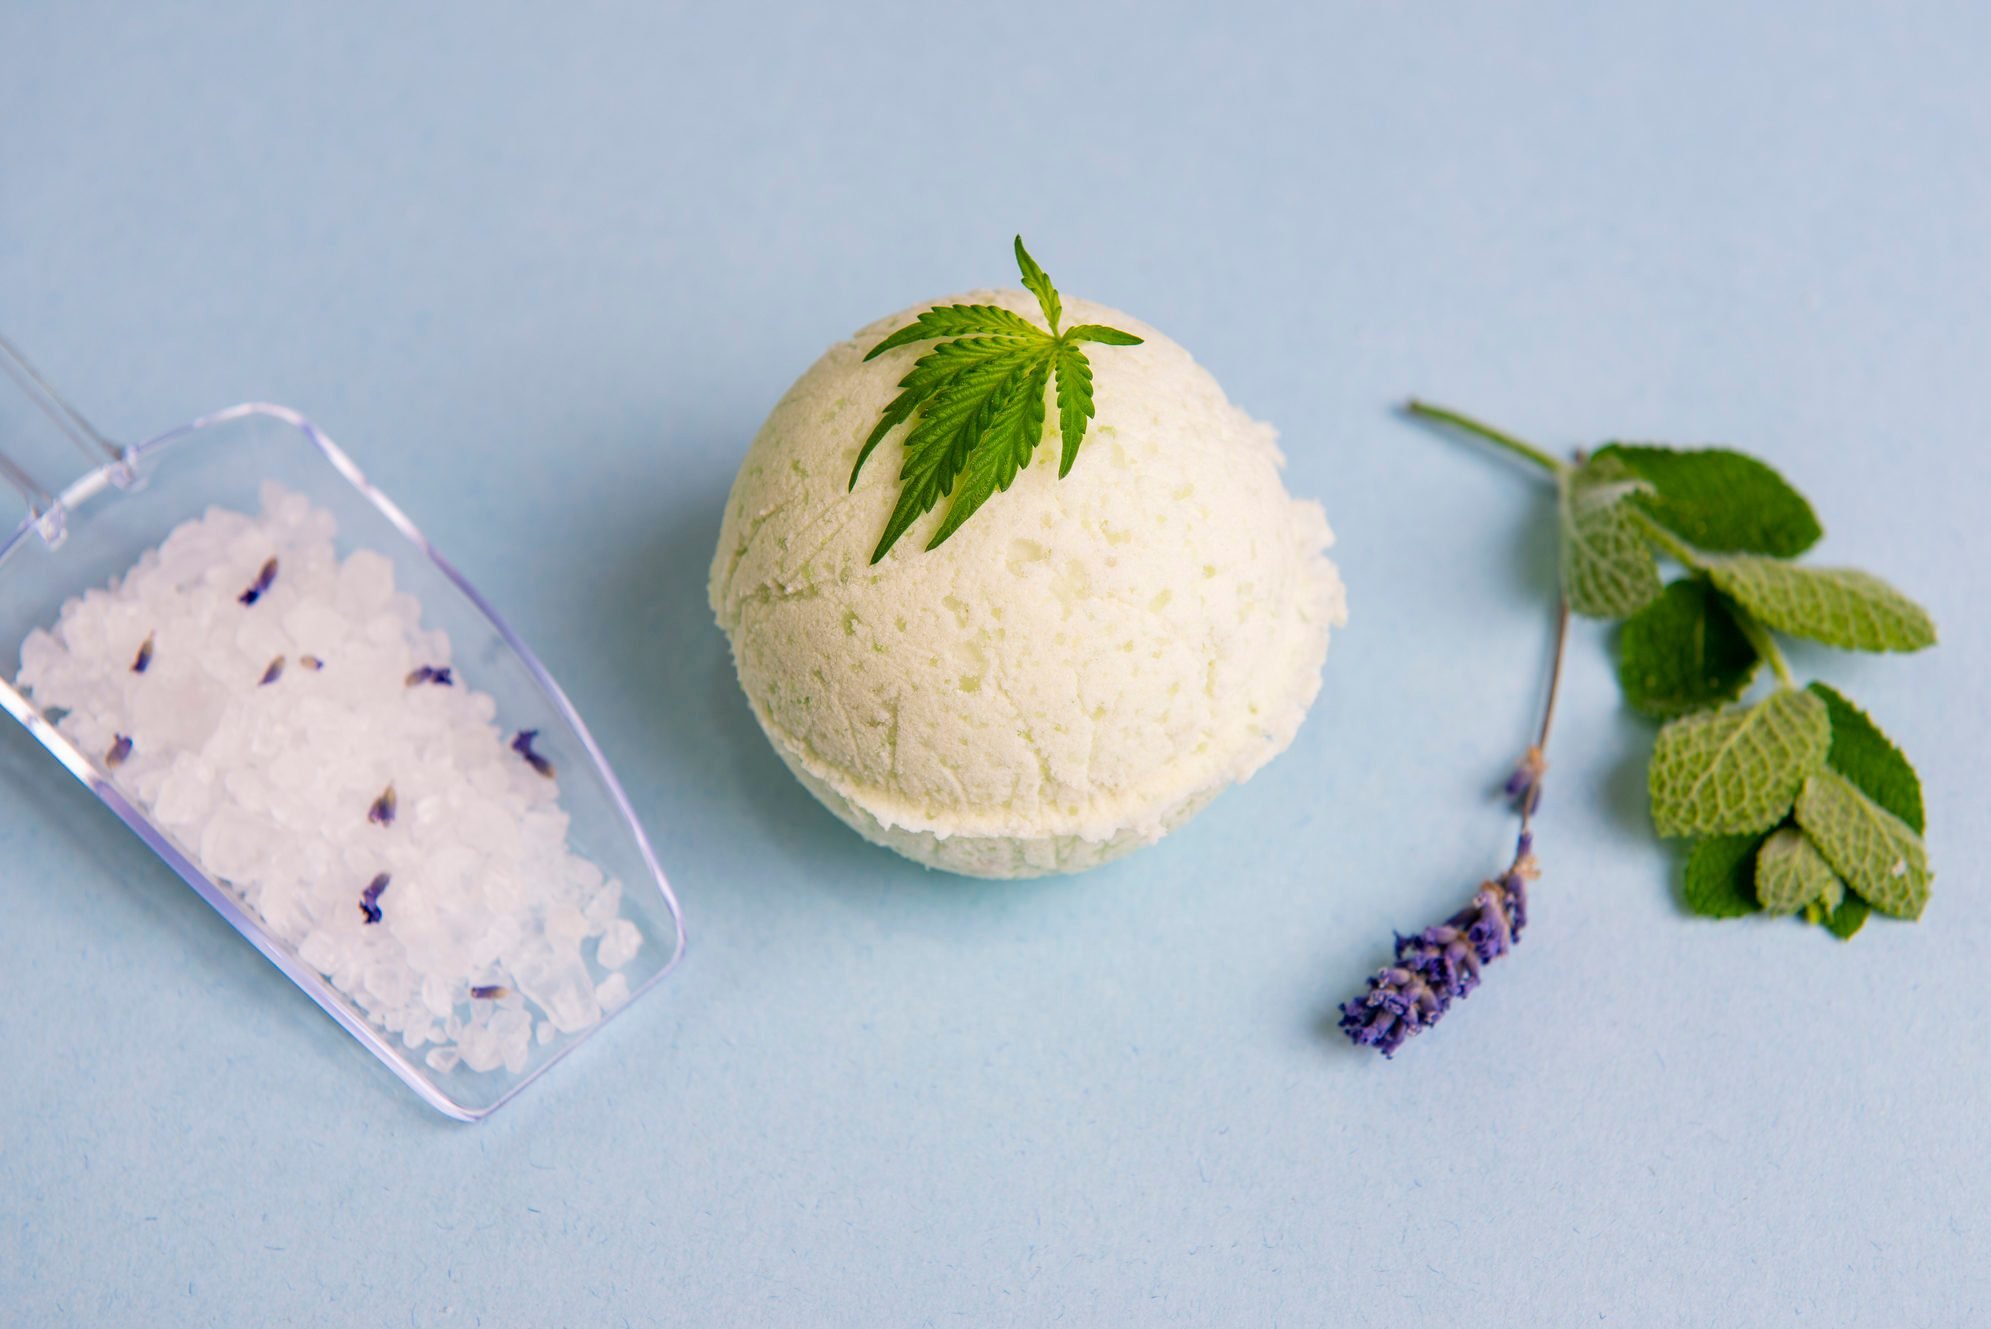 Can CBD Bath Bombs Really Help You Relax?